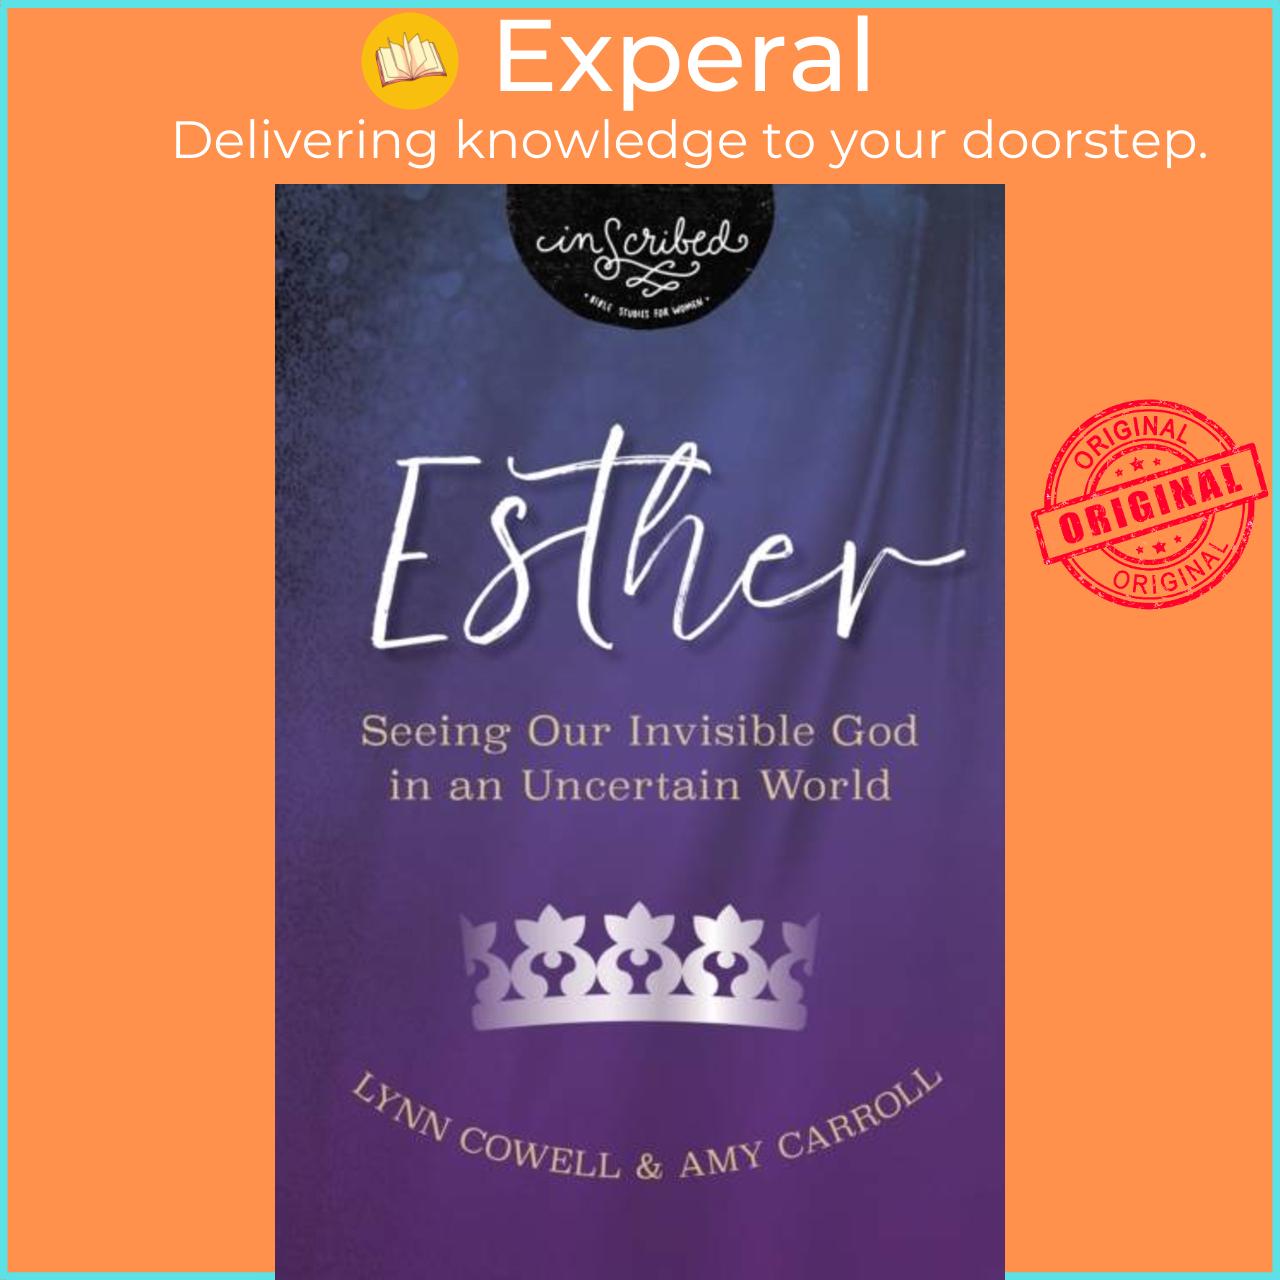 Sách - Esther - Seeing Our Invisible God in an Uncertain World by Lynn Cowell (UK edition, paperback)